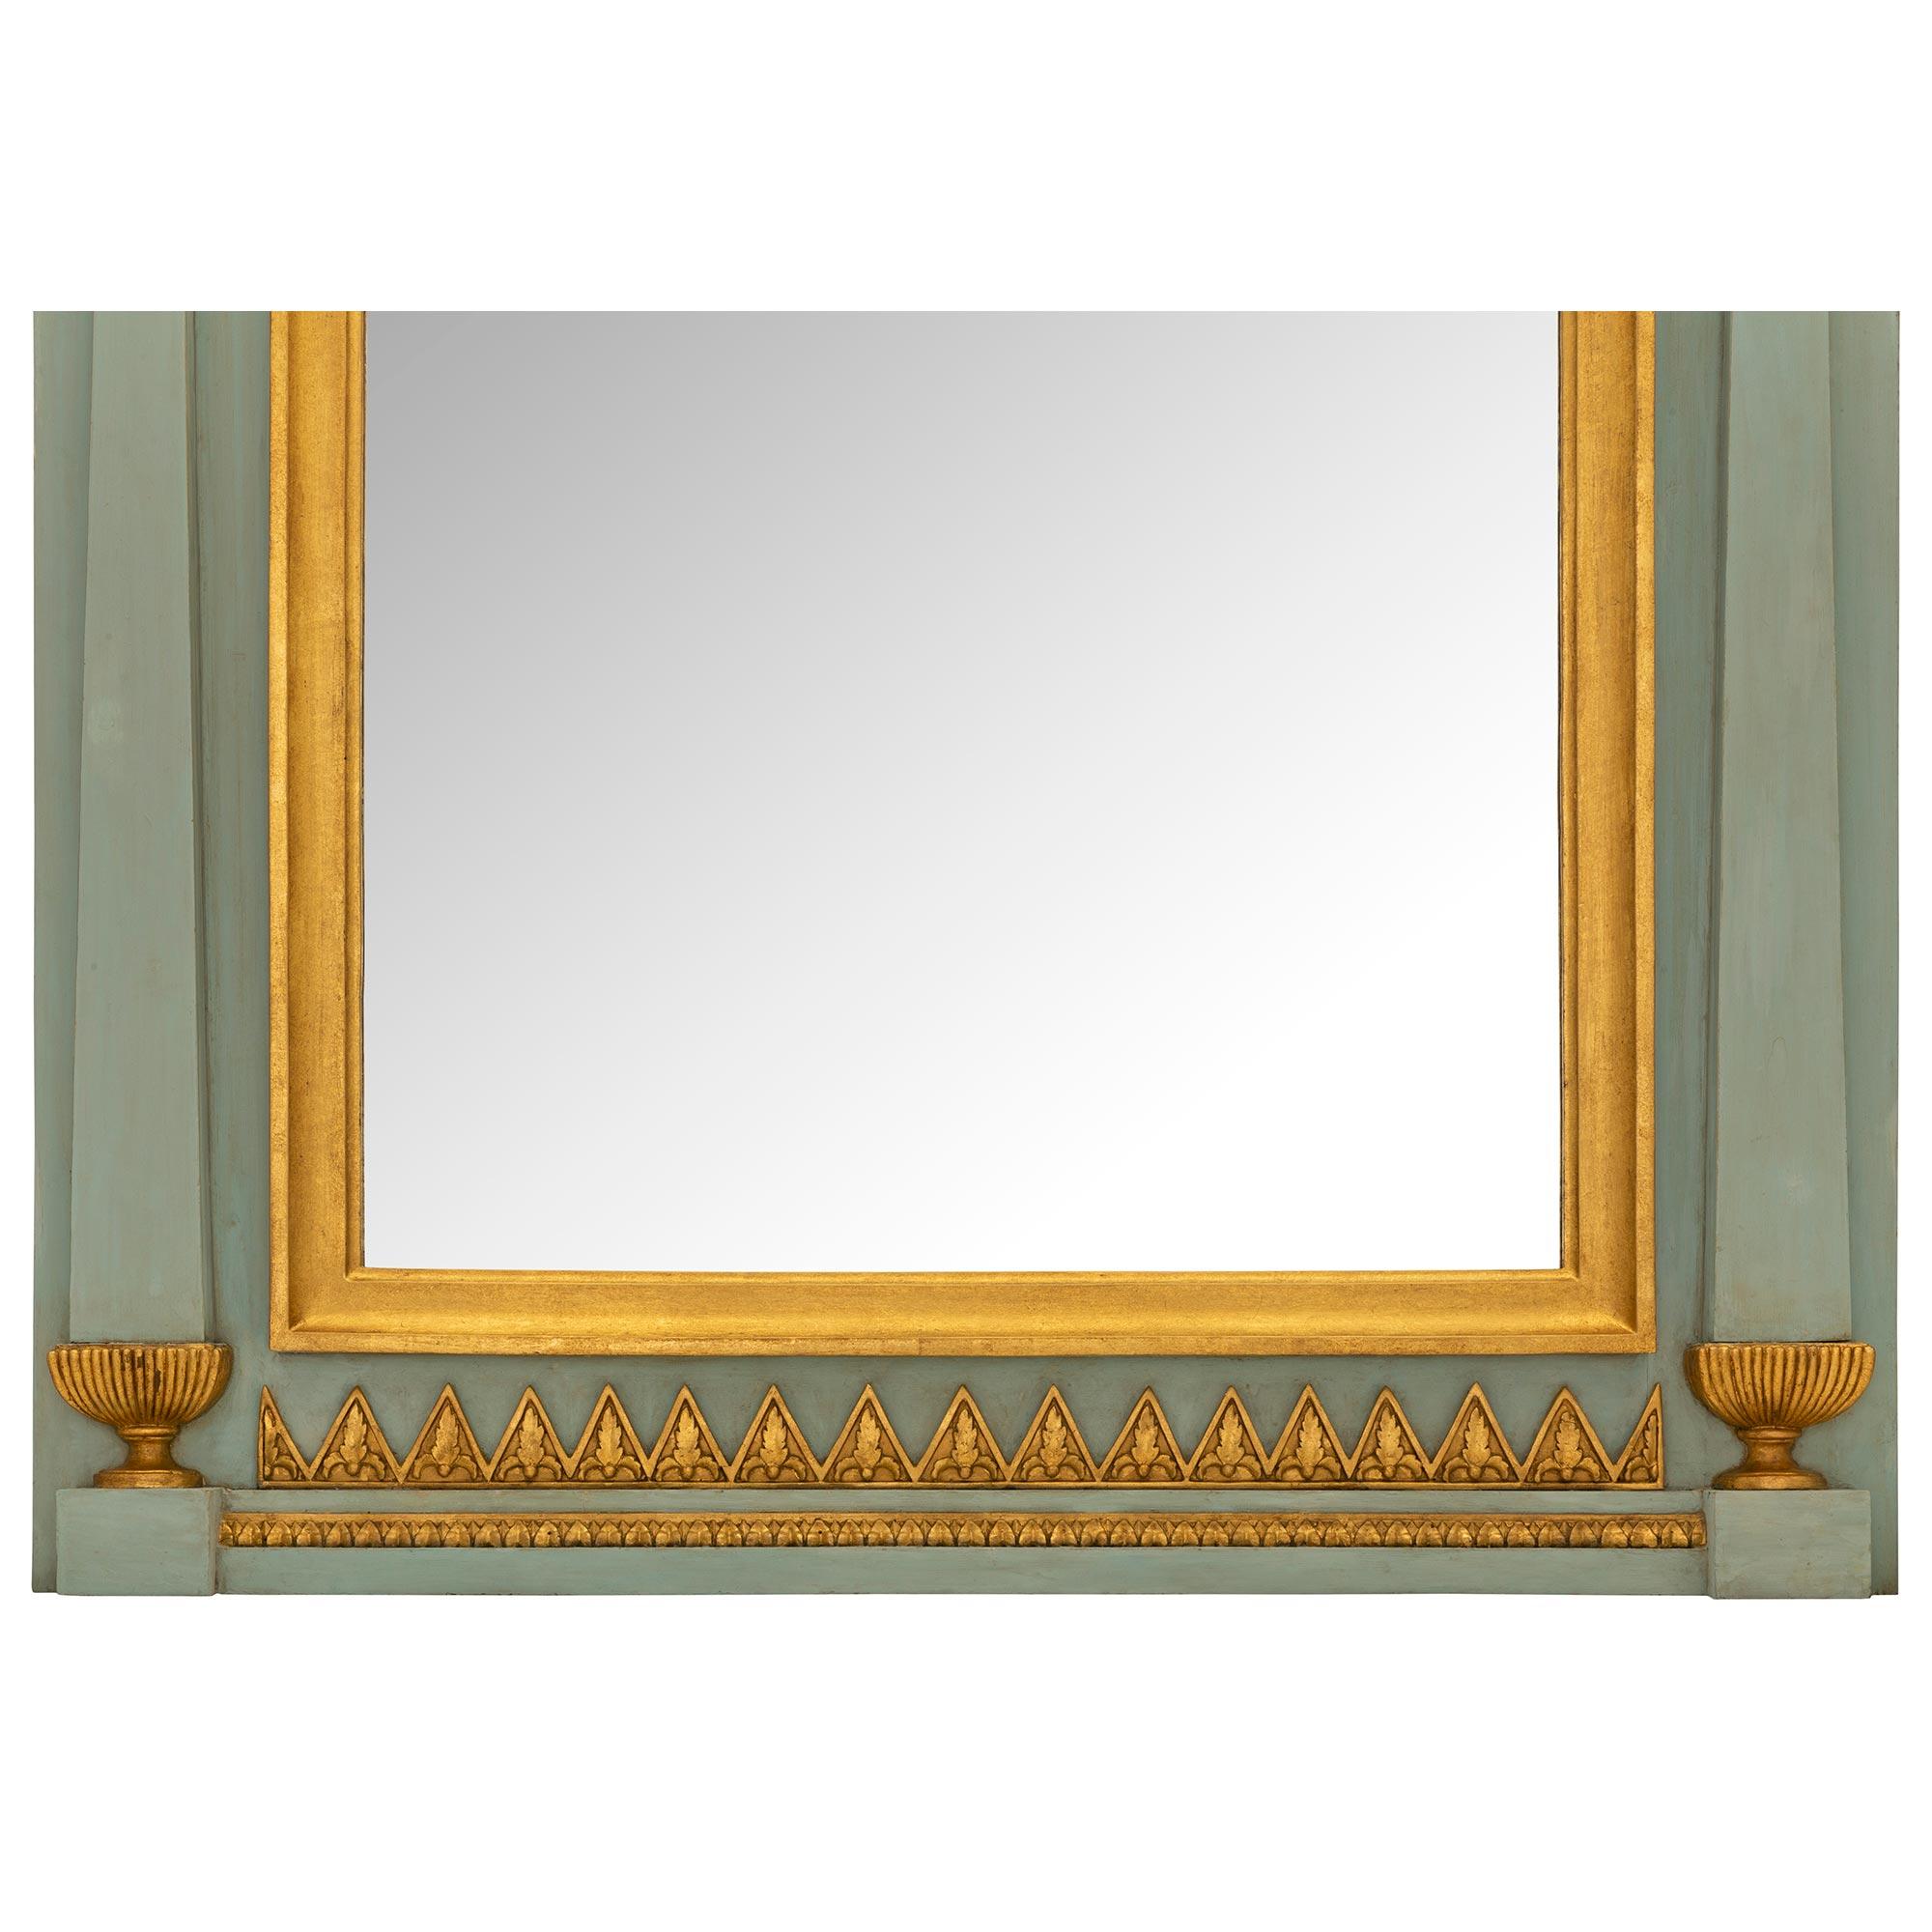 French 19th Century 1st Empire Period Patinated and Giltwood Mirror, Circa 1805 For Sale 4